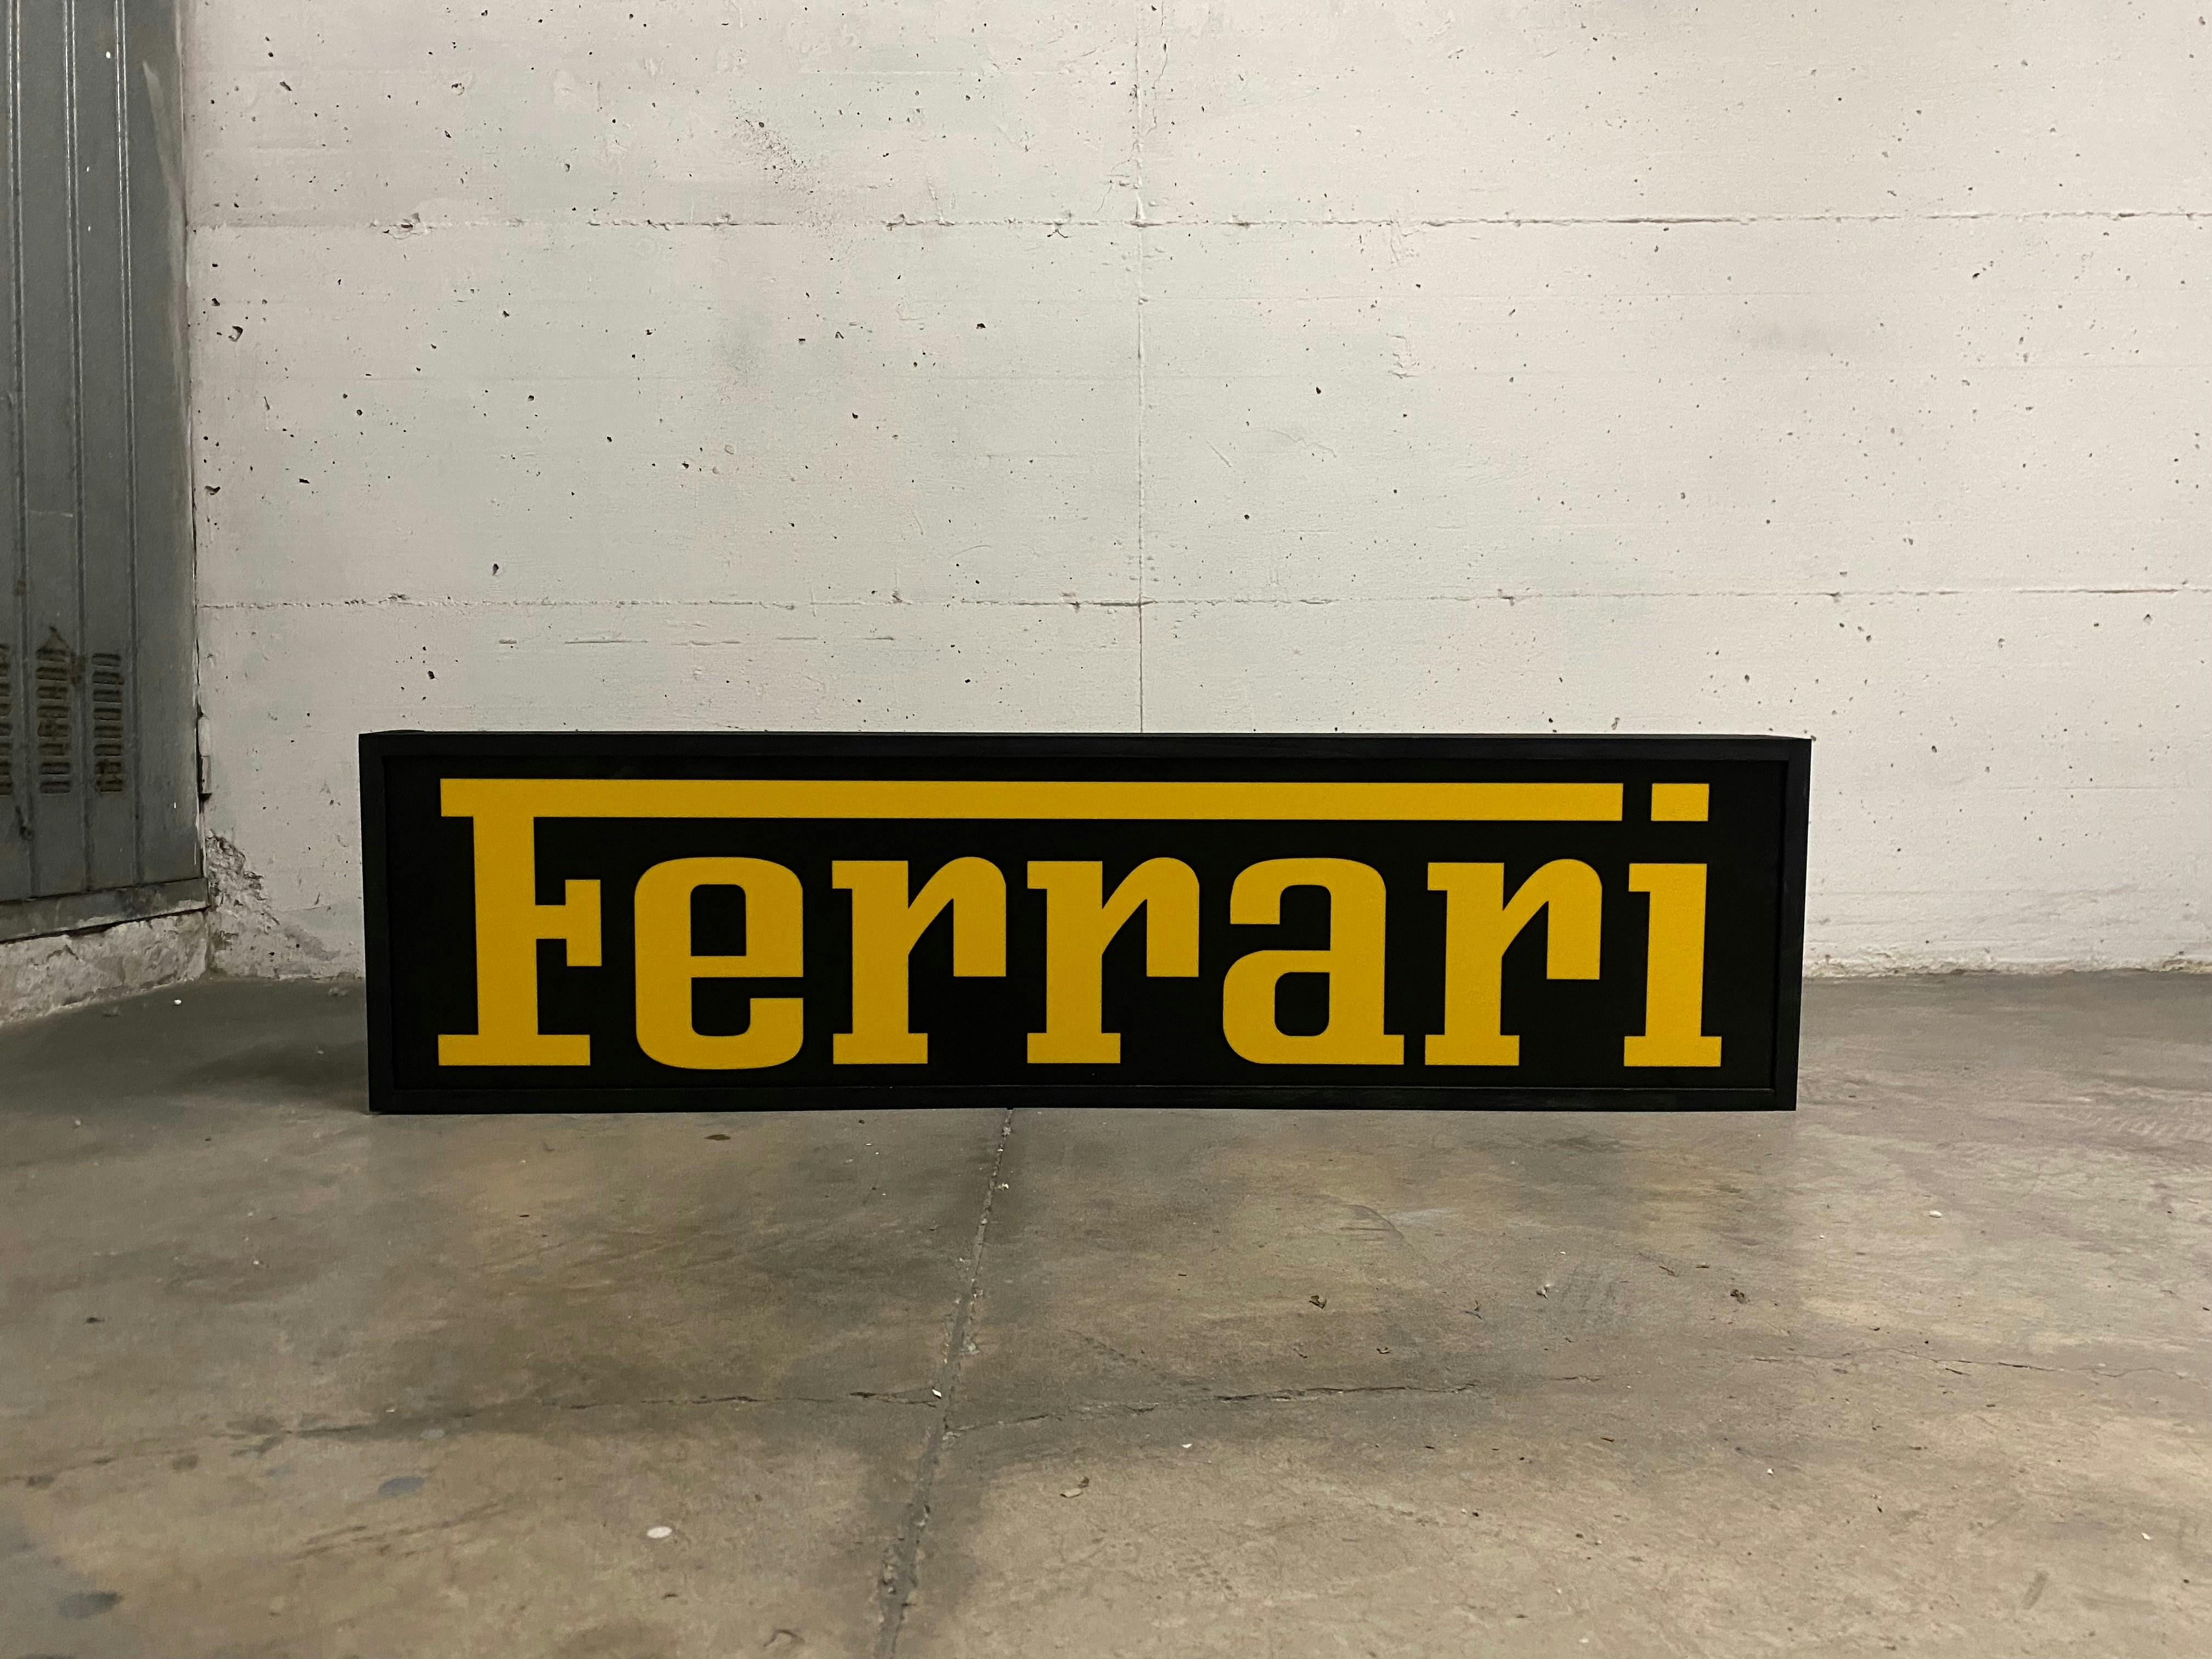 FERRARI ILLUMINATED SIGN for sale by auction in San Miniato, Italy